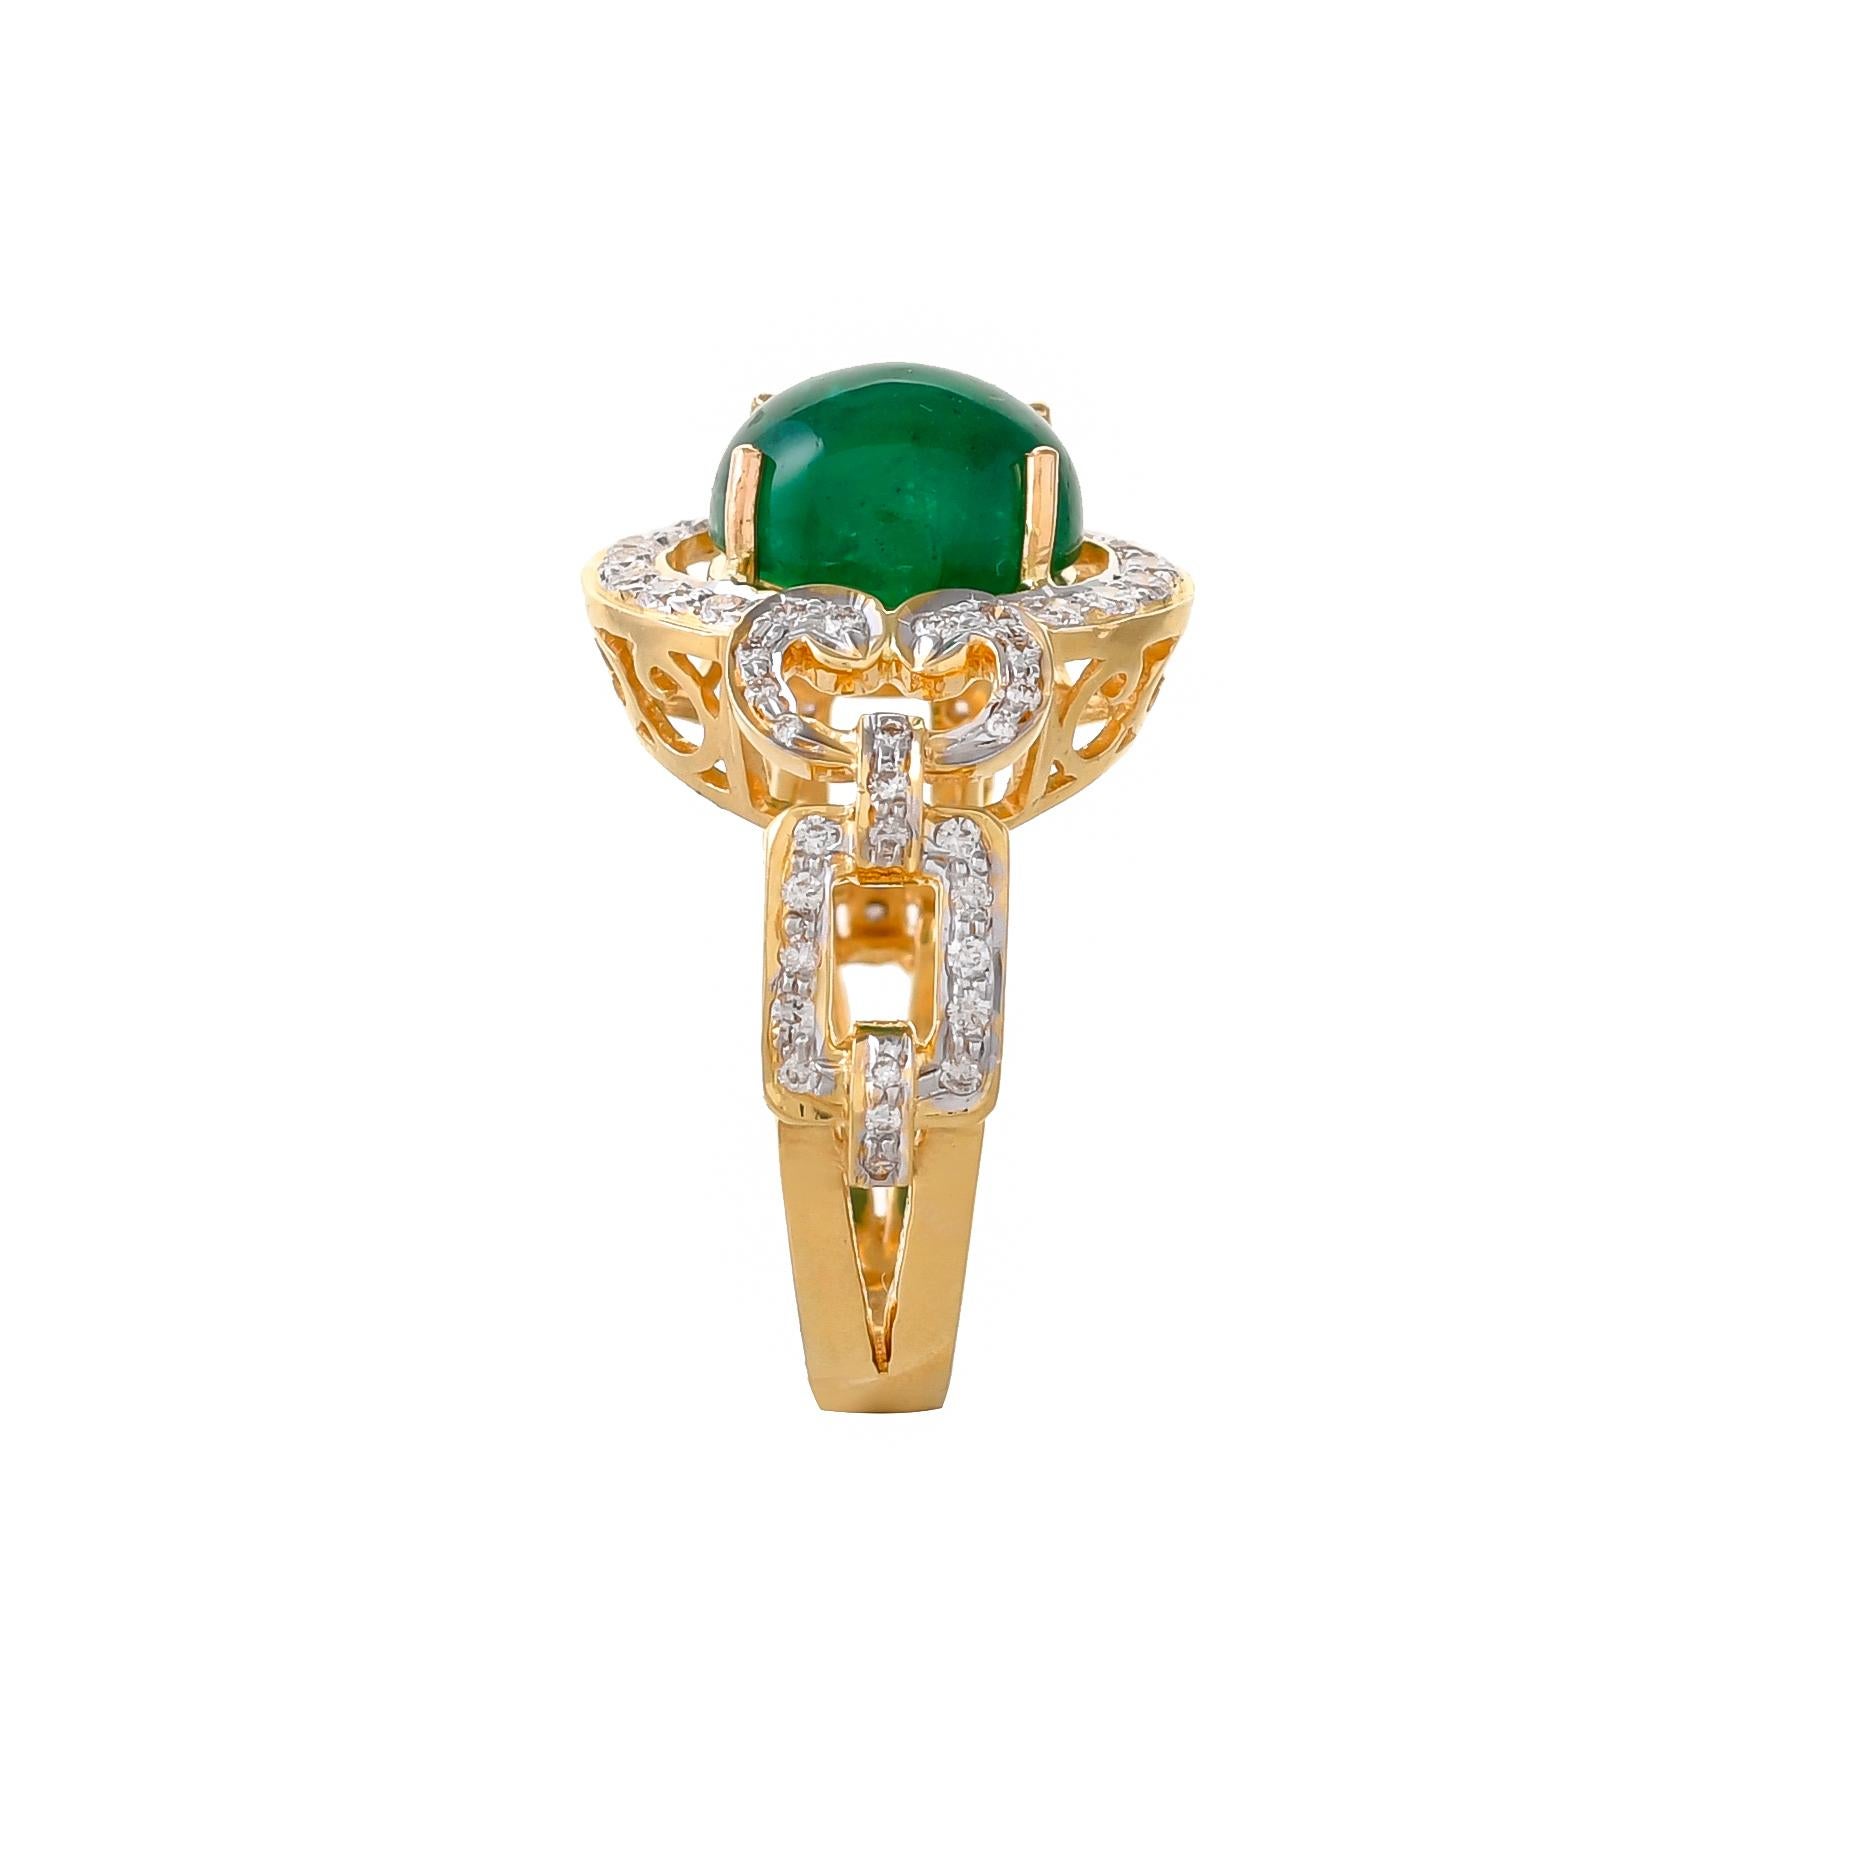 Centring on an oval-shaped luxurious green emerald cabochon weighing approximately 4.38 carats surrounded by diamonds, to the openwork surround gallery and bifurcated shoulders set with sparkling round diamonds with a total diamond weight of 0.56